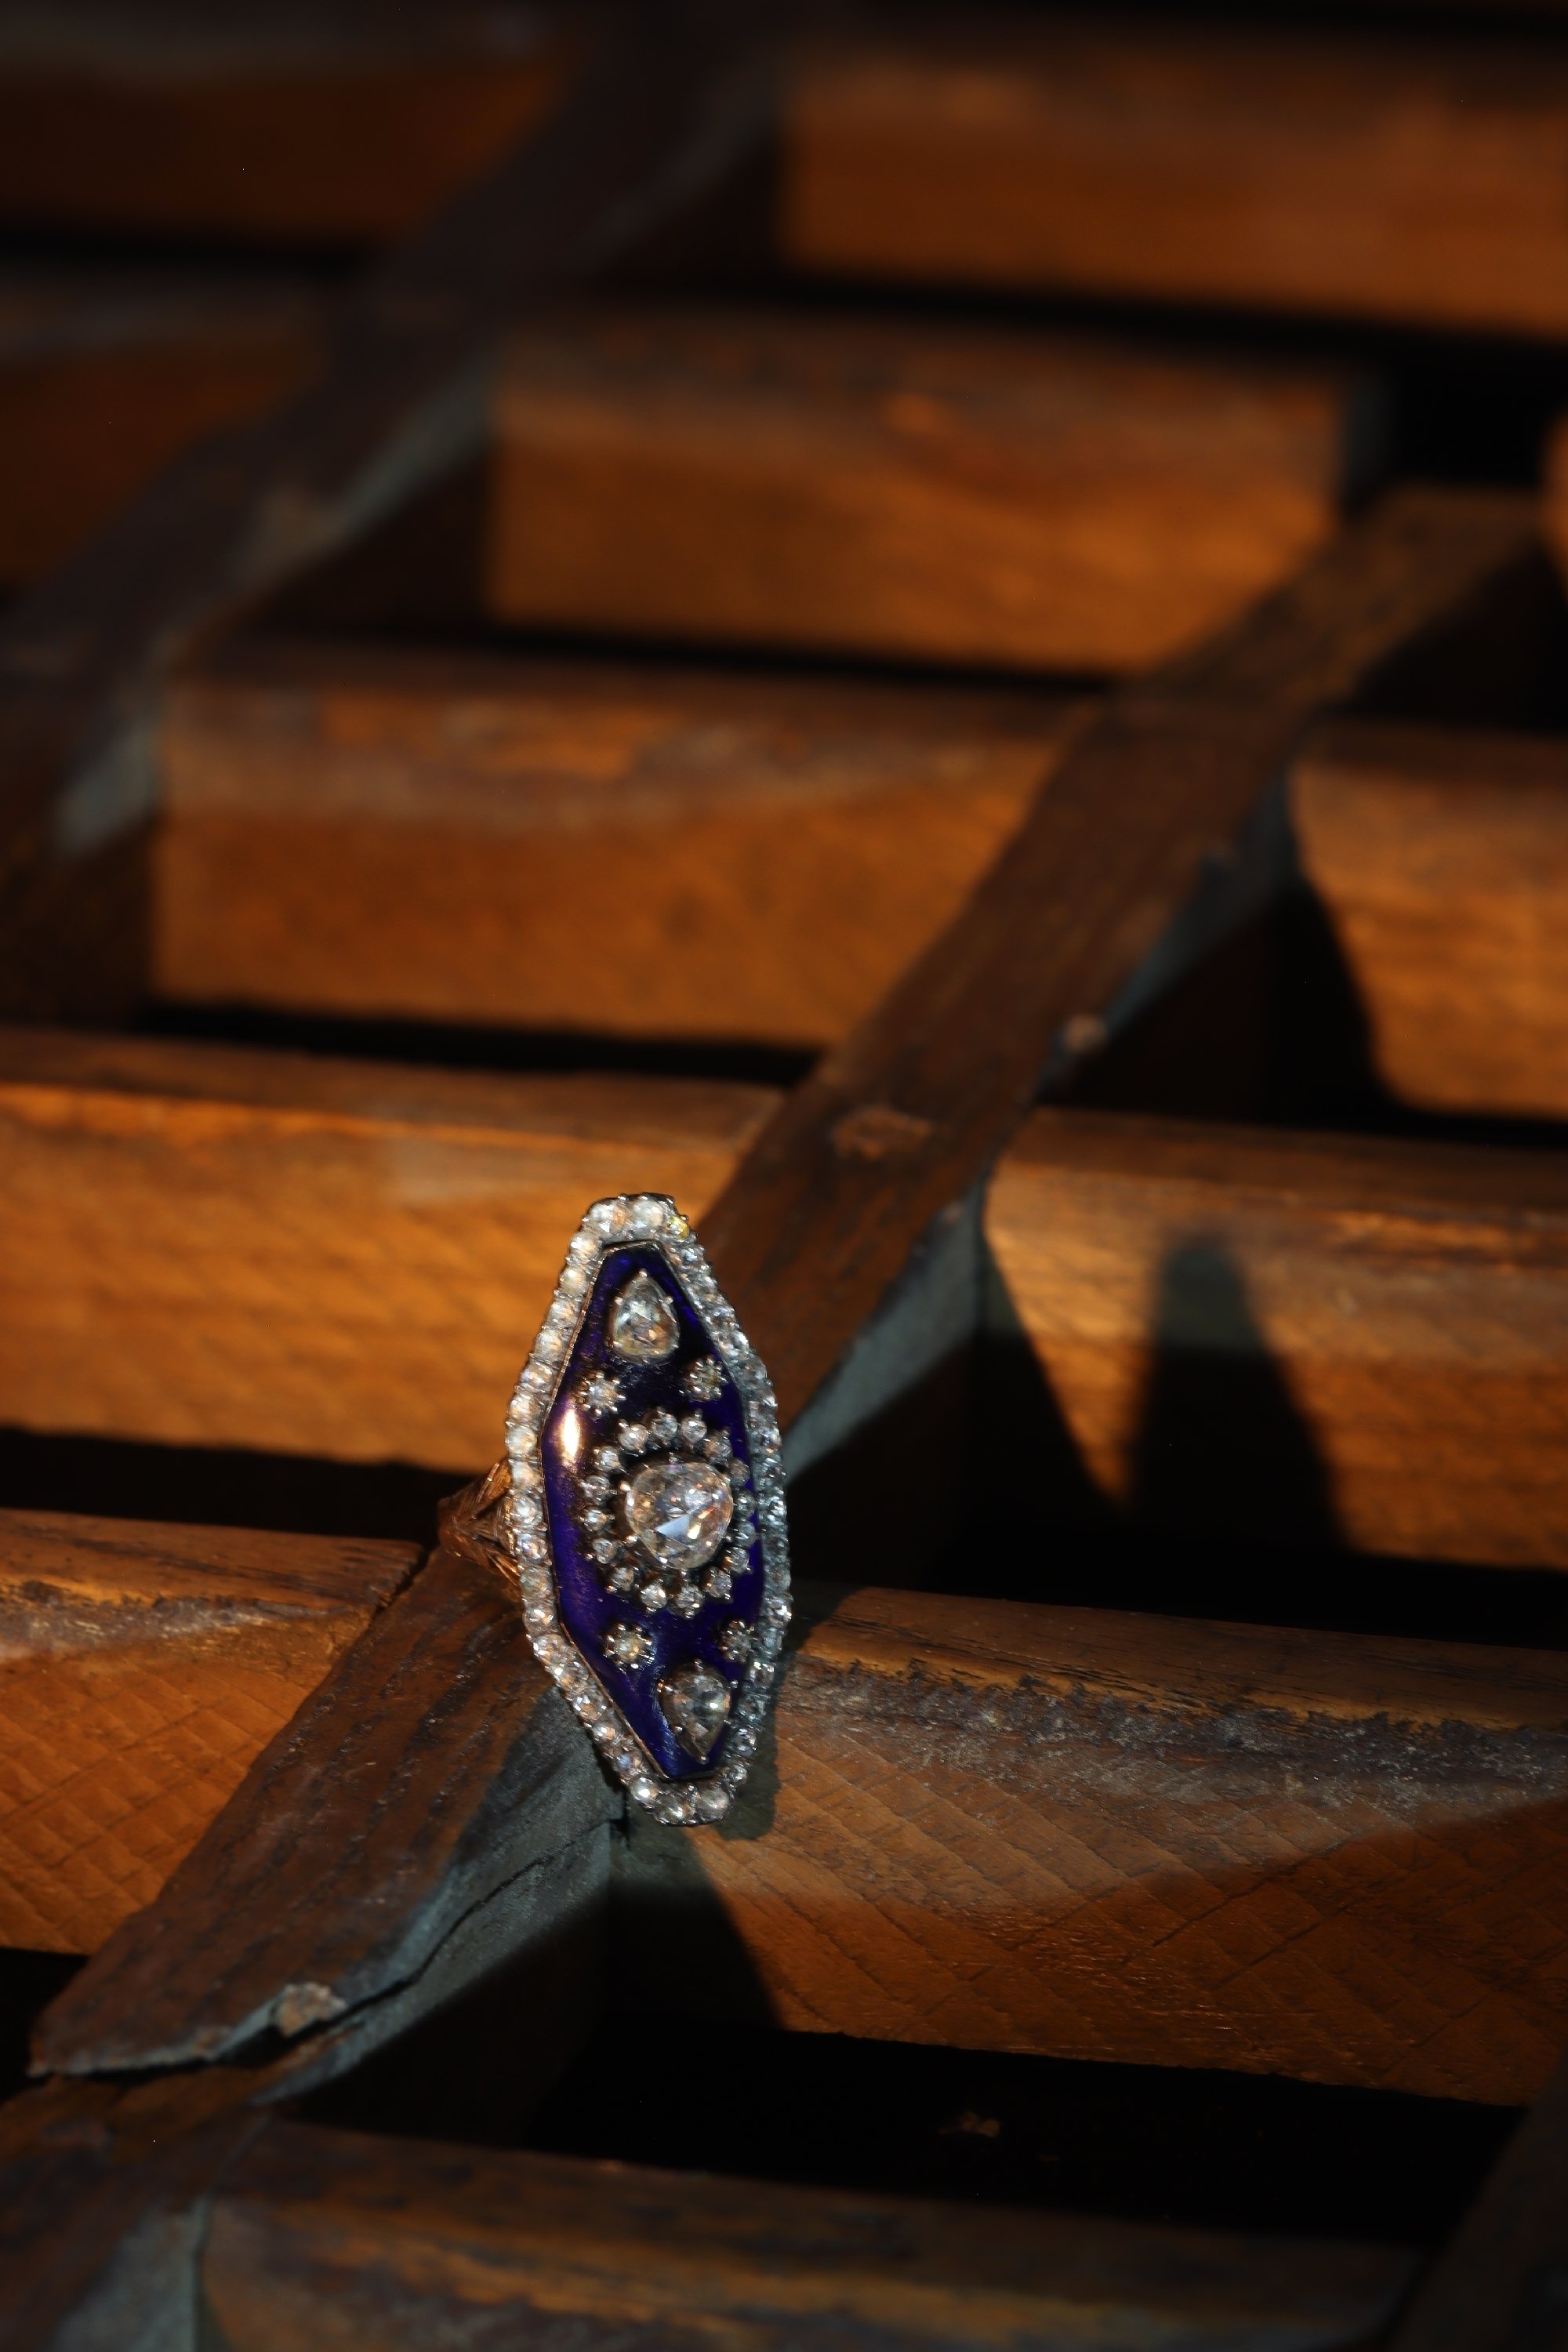 Click picture to get to this magnificent Victorian rose cut diamond ring with blue enamel